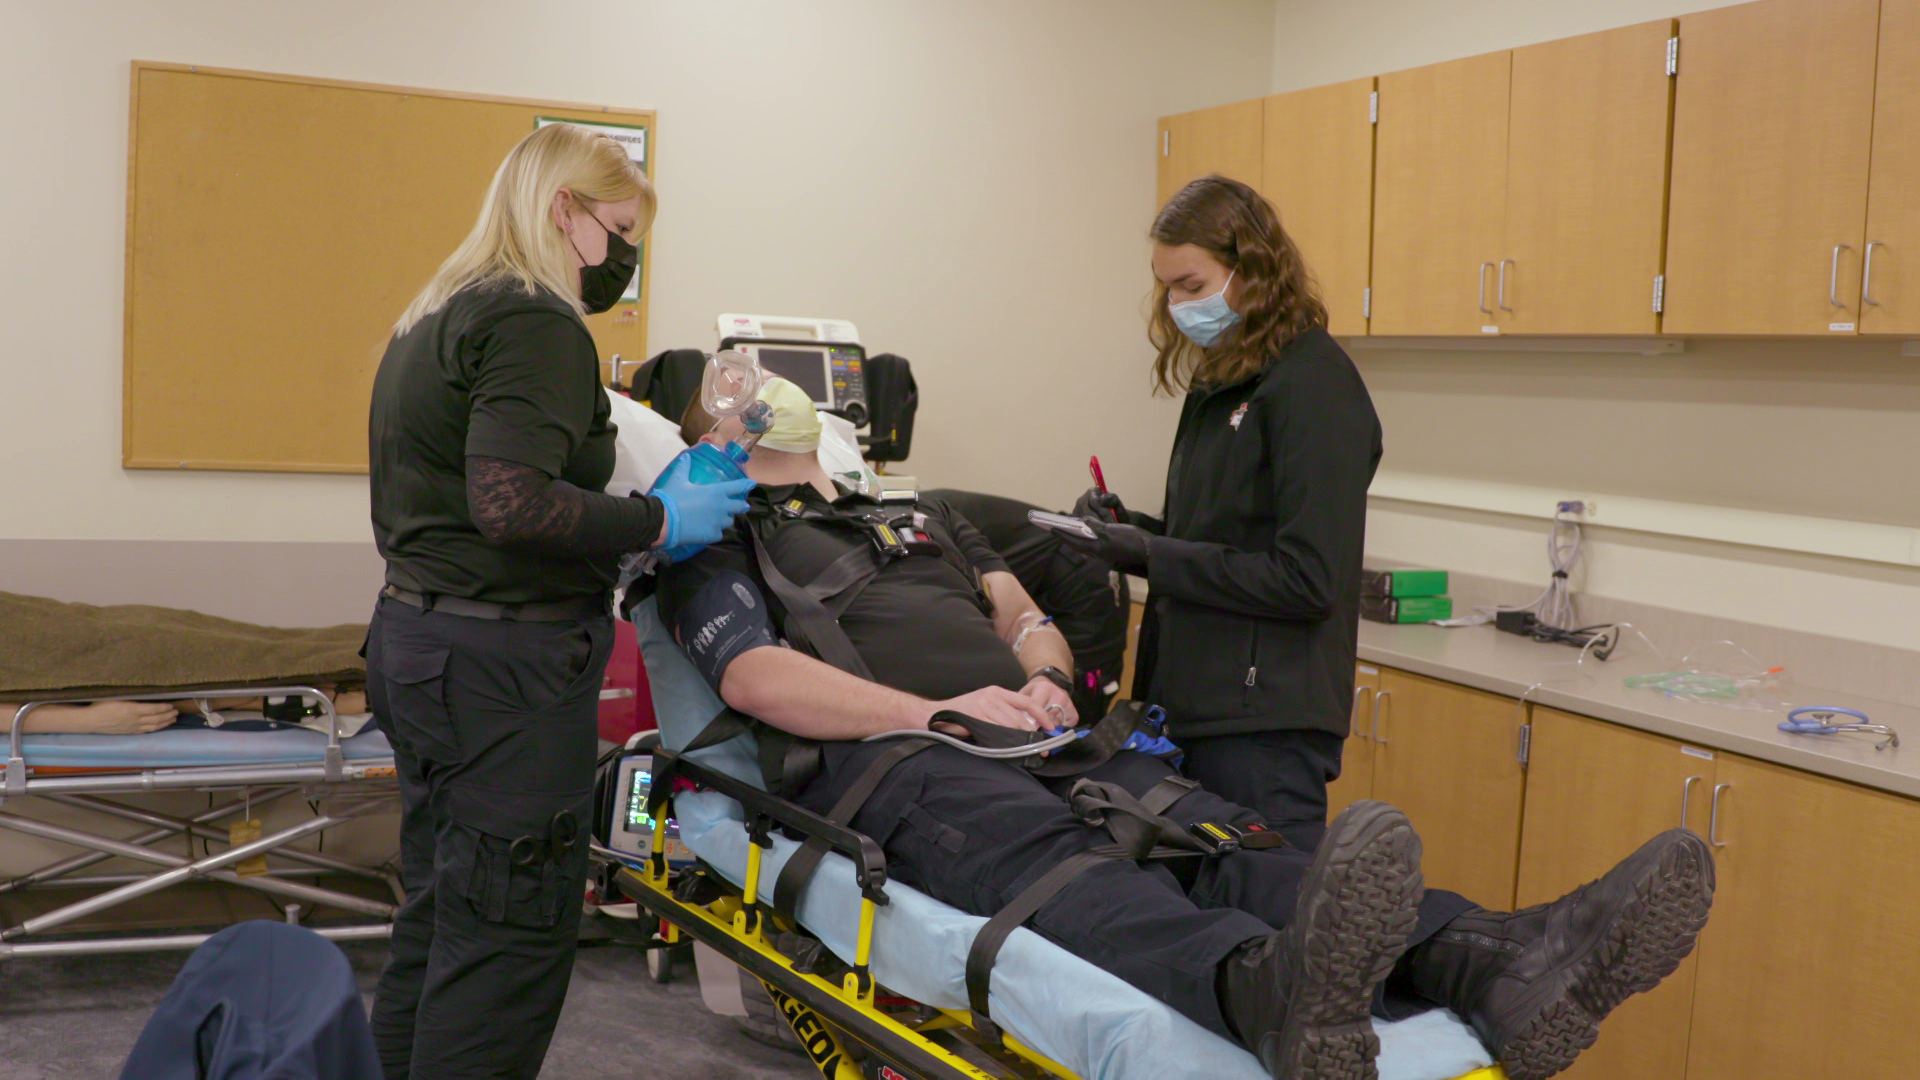 Jenna Quakenbush trains to be a paramedic and stands over another student who is strapped into a gurney at Western Technical College in La Crosse.